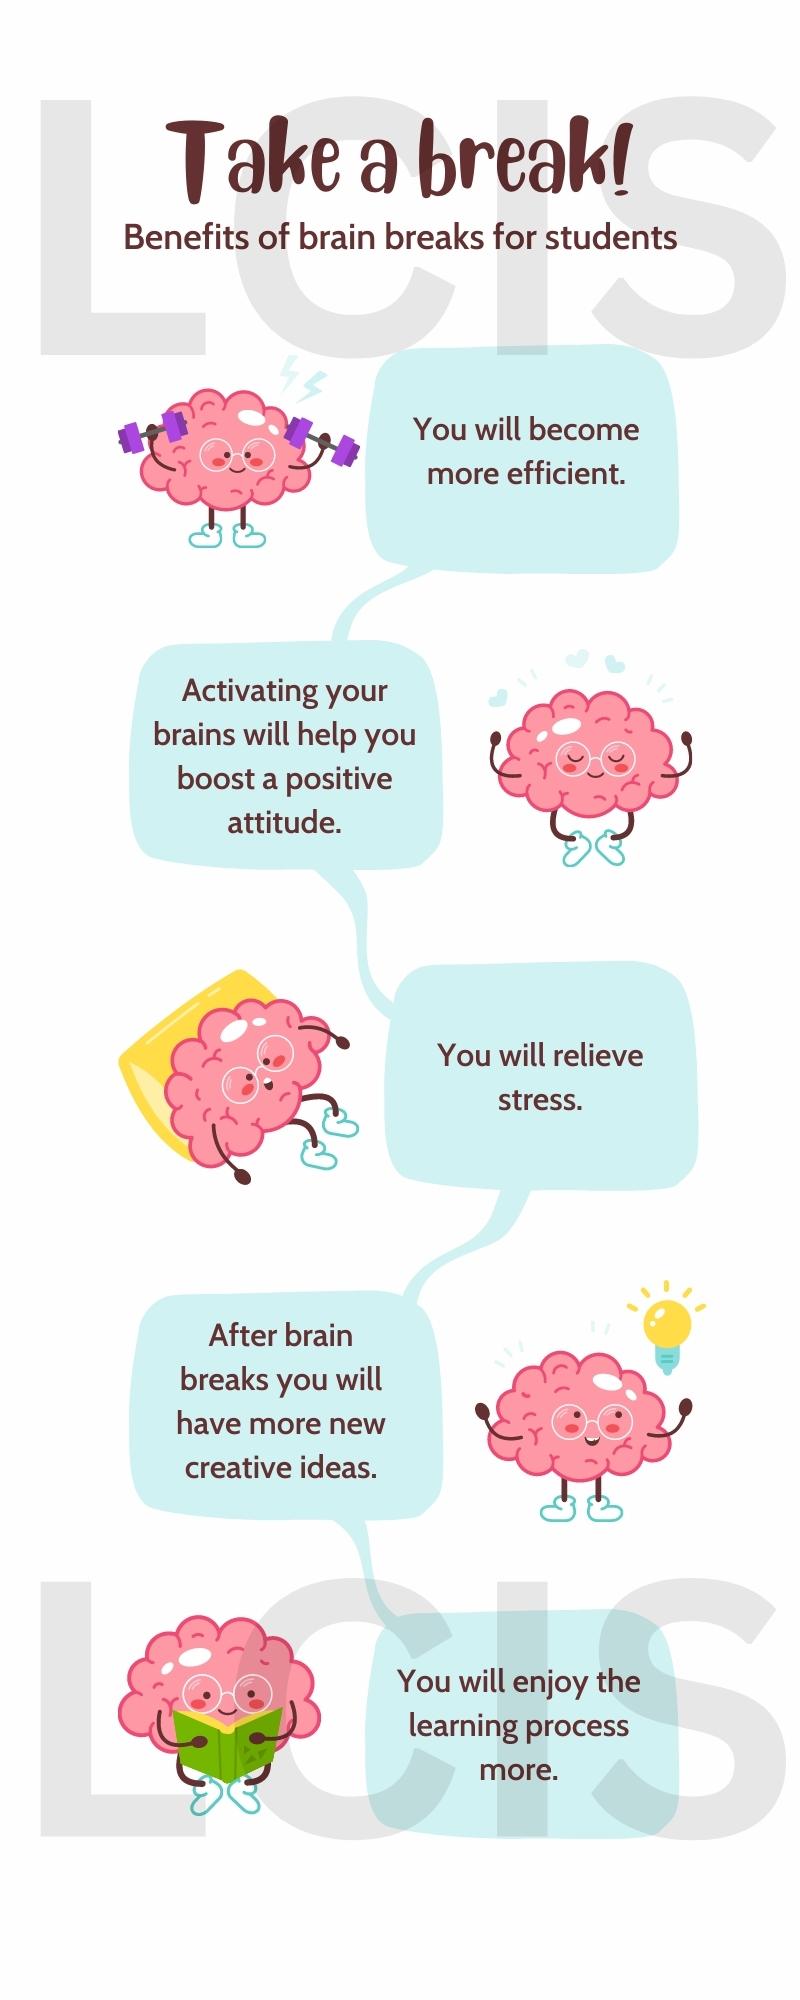 Benefits of brain breaks for students